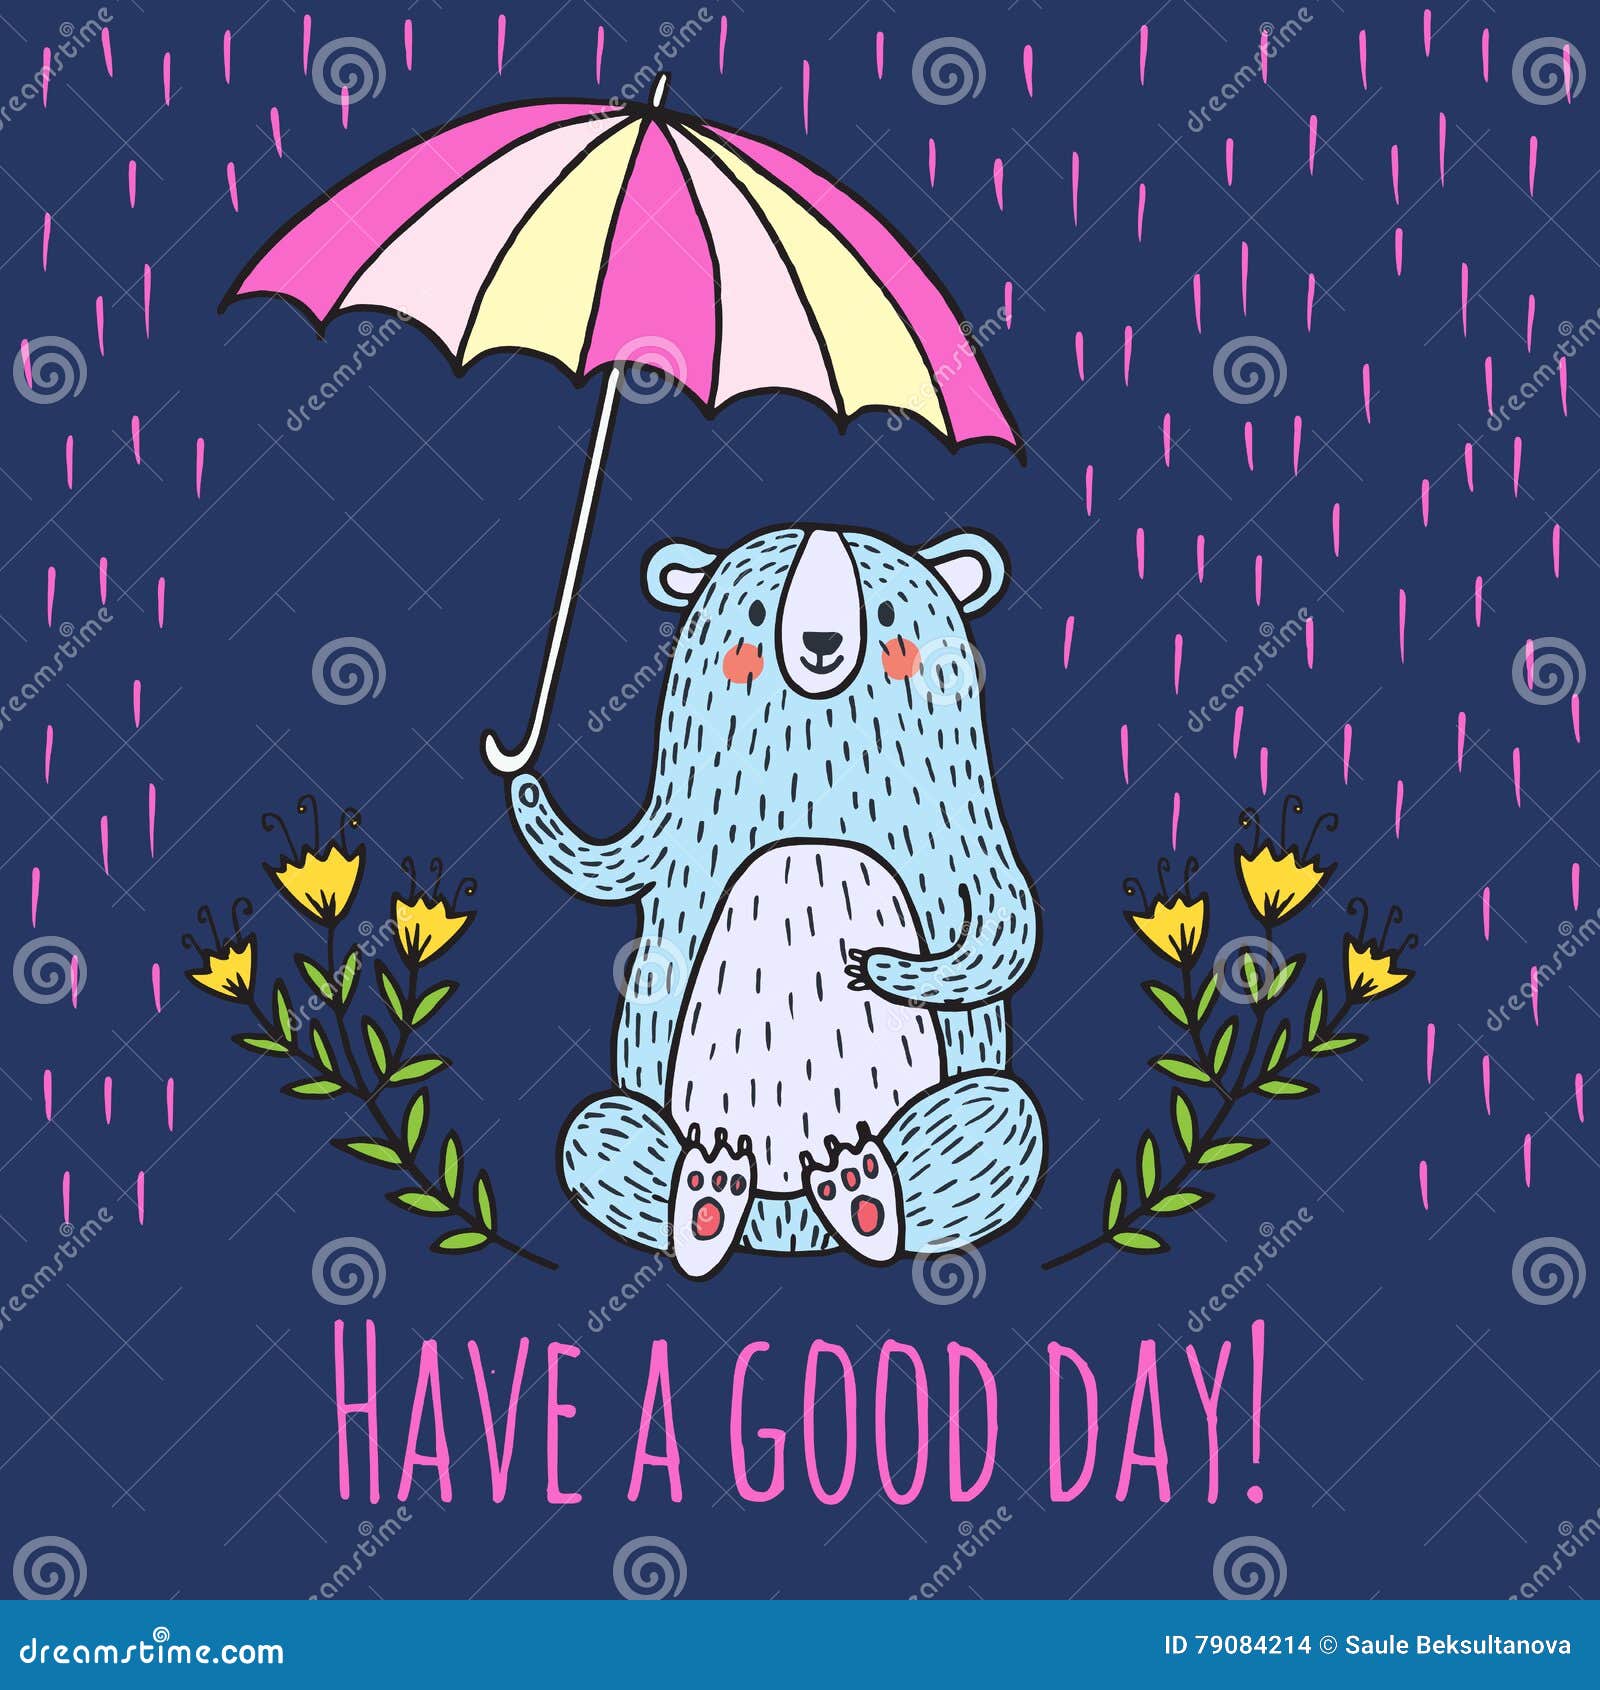 Have a Good Day Greeting Card Stock Illustration - Illustration of ...